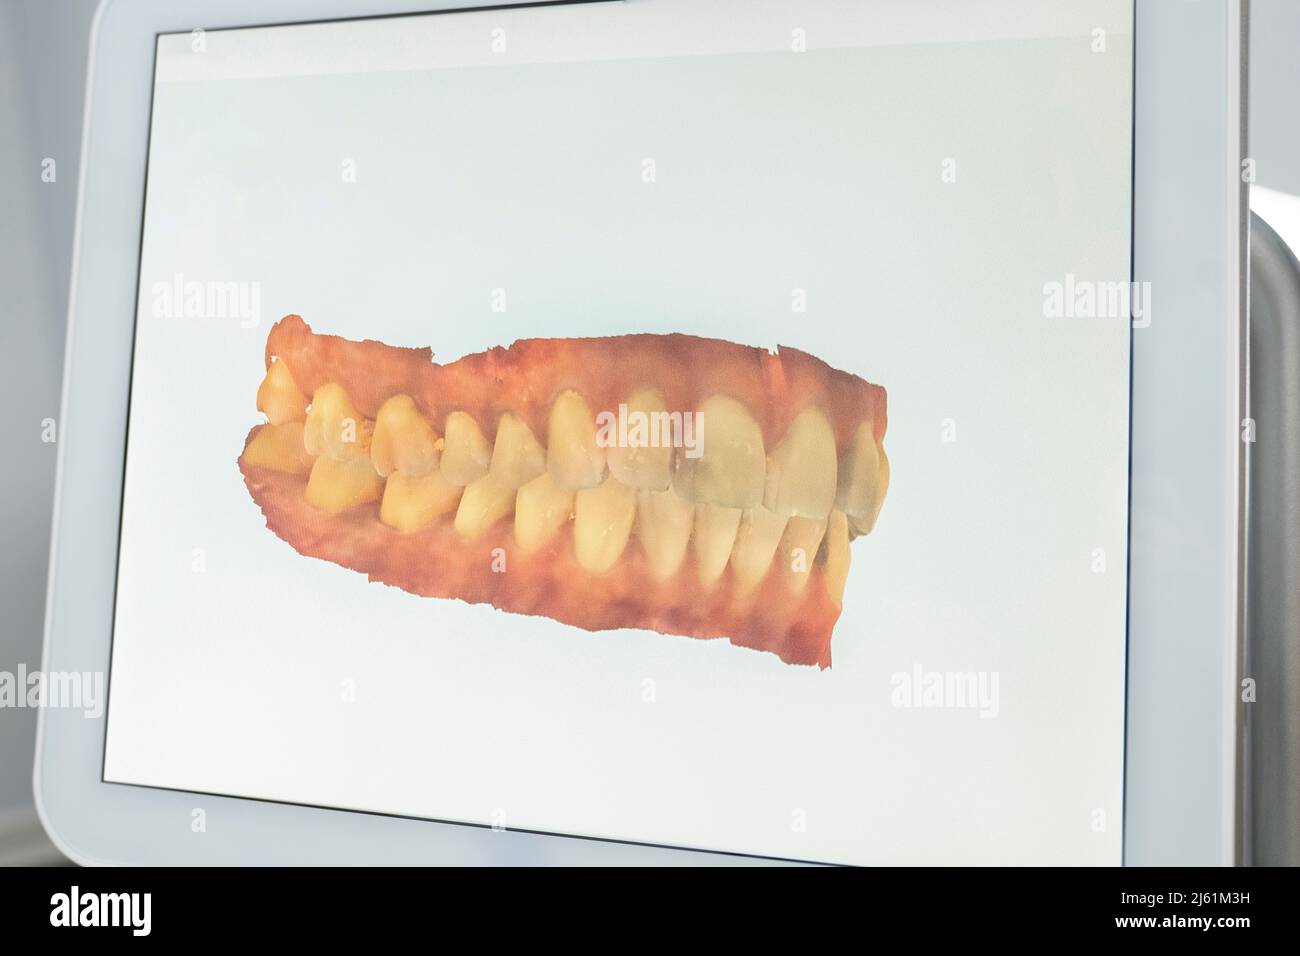 Scanned image of teeth on monitor screen at dental clinic Stock Photo